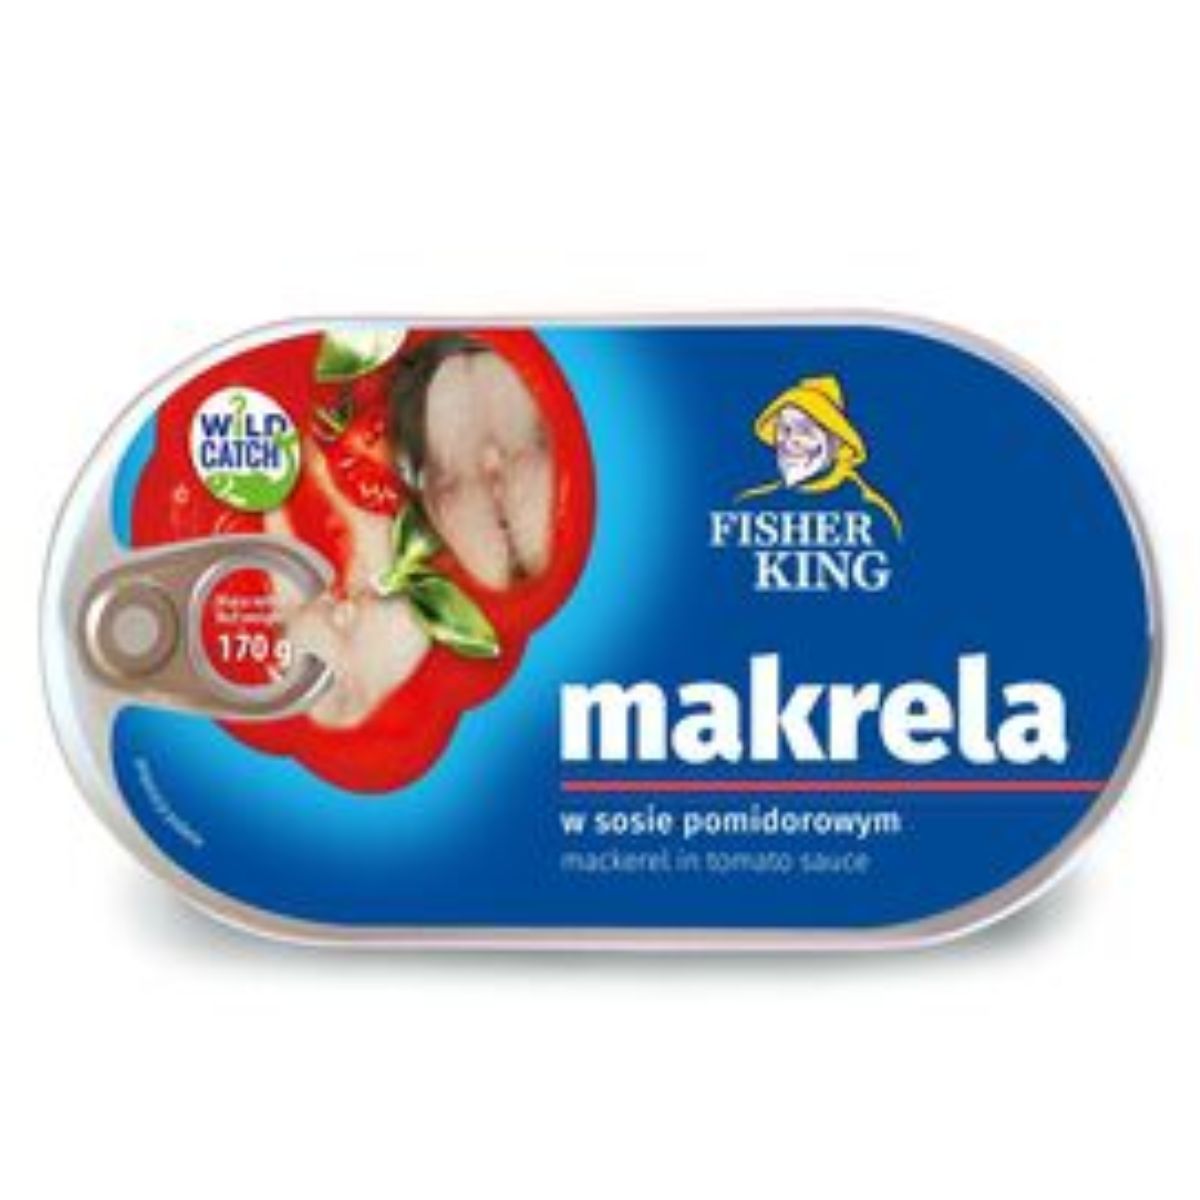 A tin of Fisher King - Mackerel Fillet in Tomato Sauce - 170g on a white background.